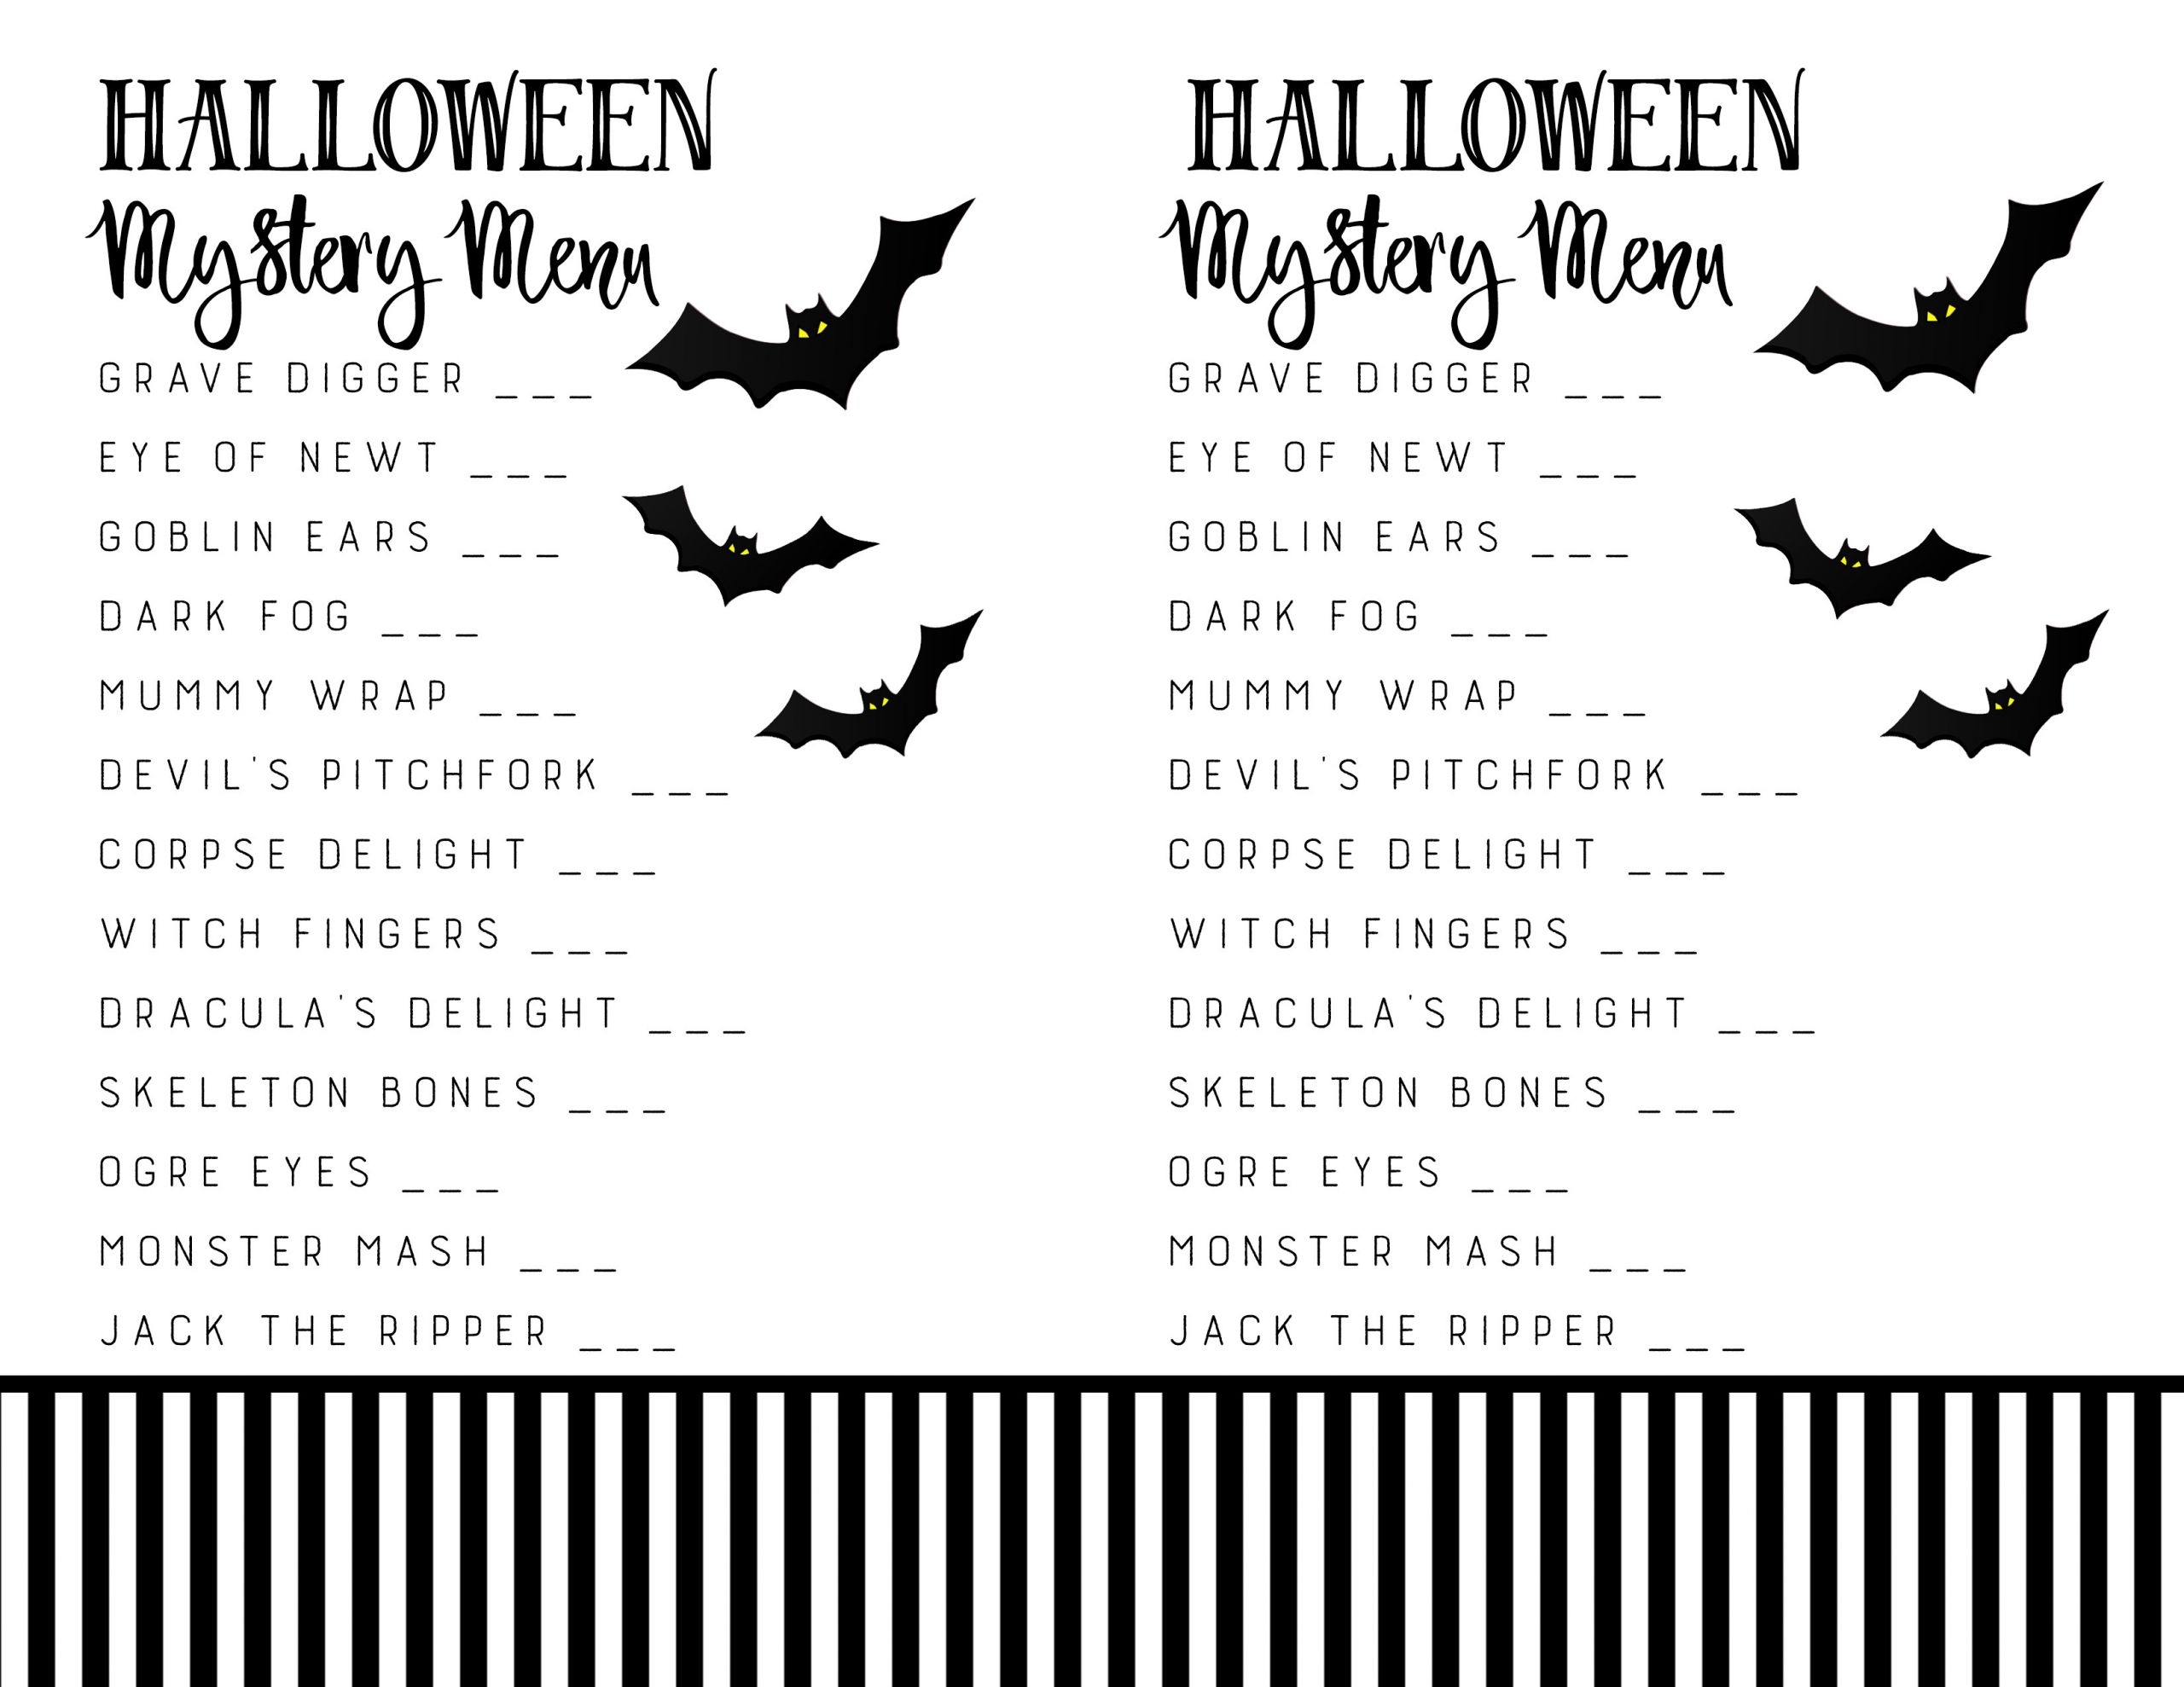 Mystery Dinner Ideas
 Halloween Mystery Dinner Party Free Menu The Crafting Chicks